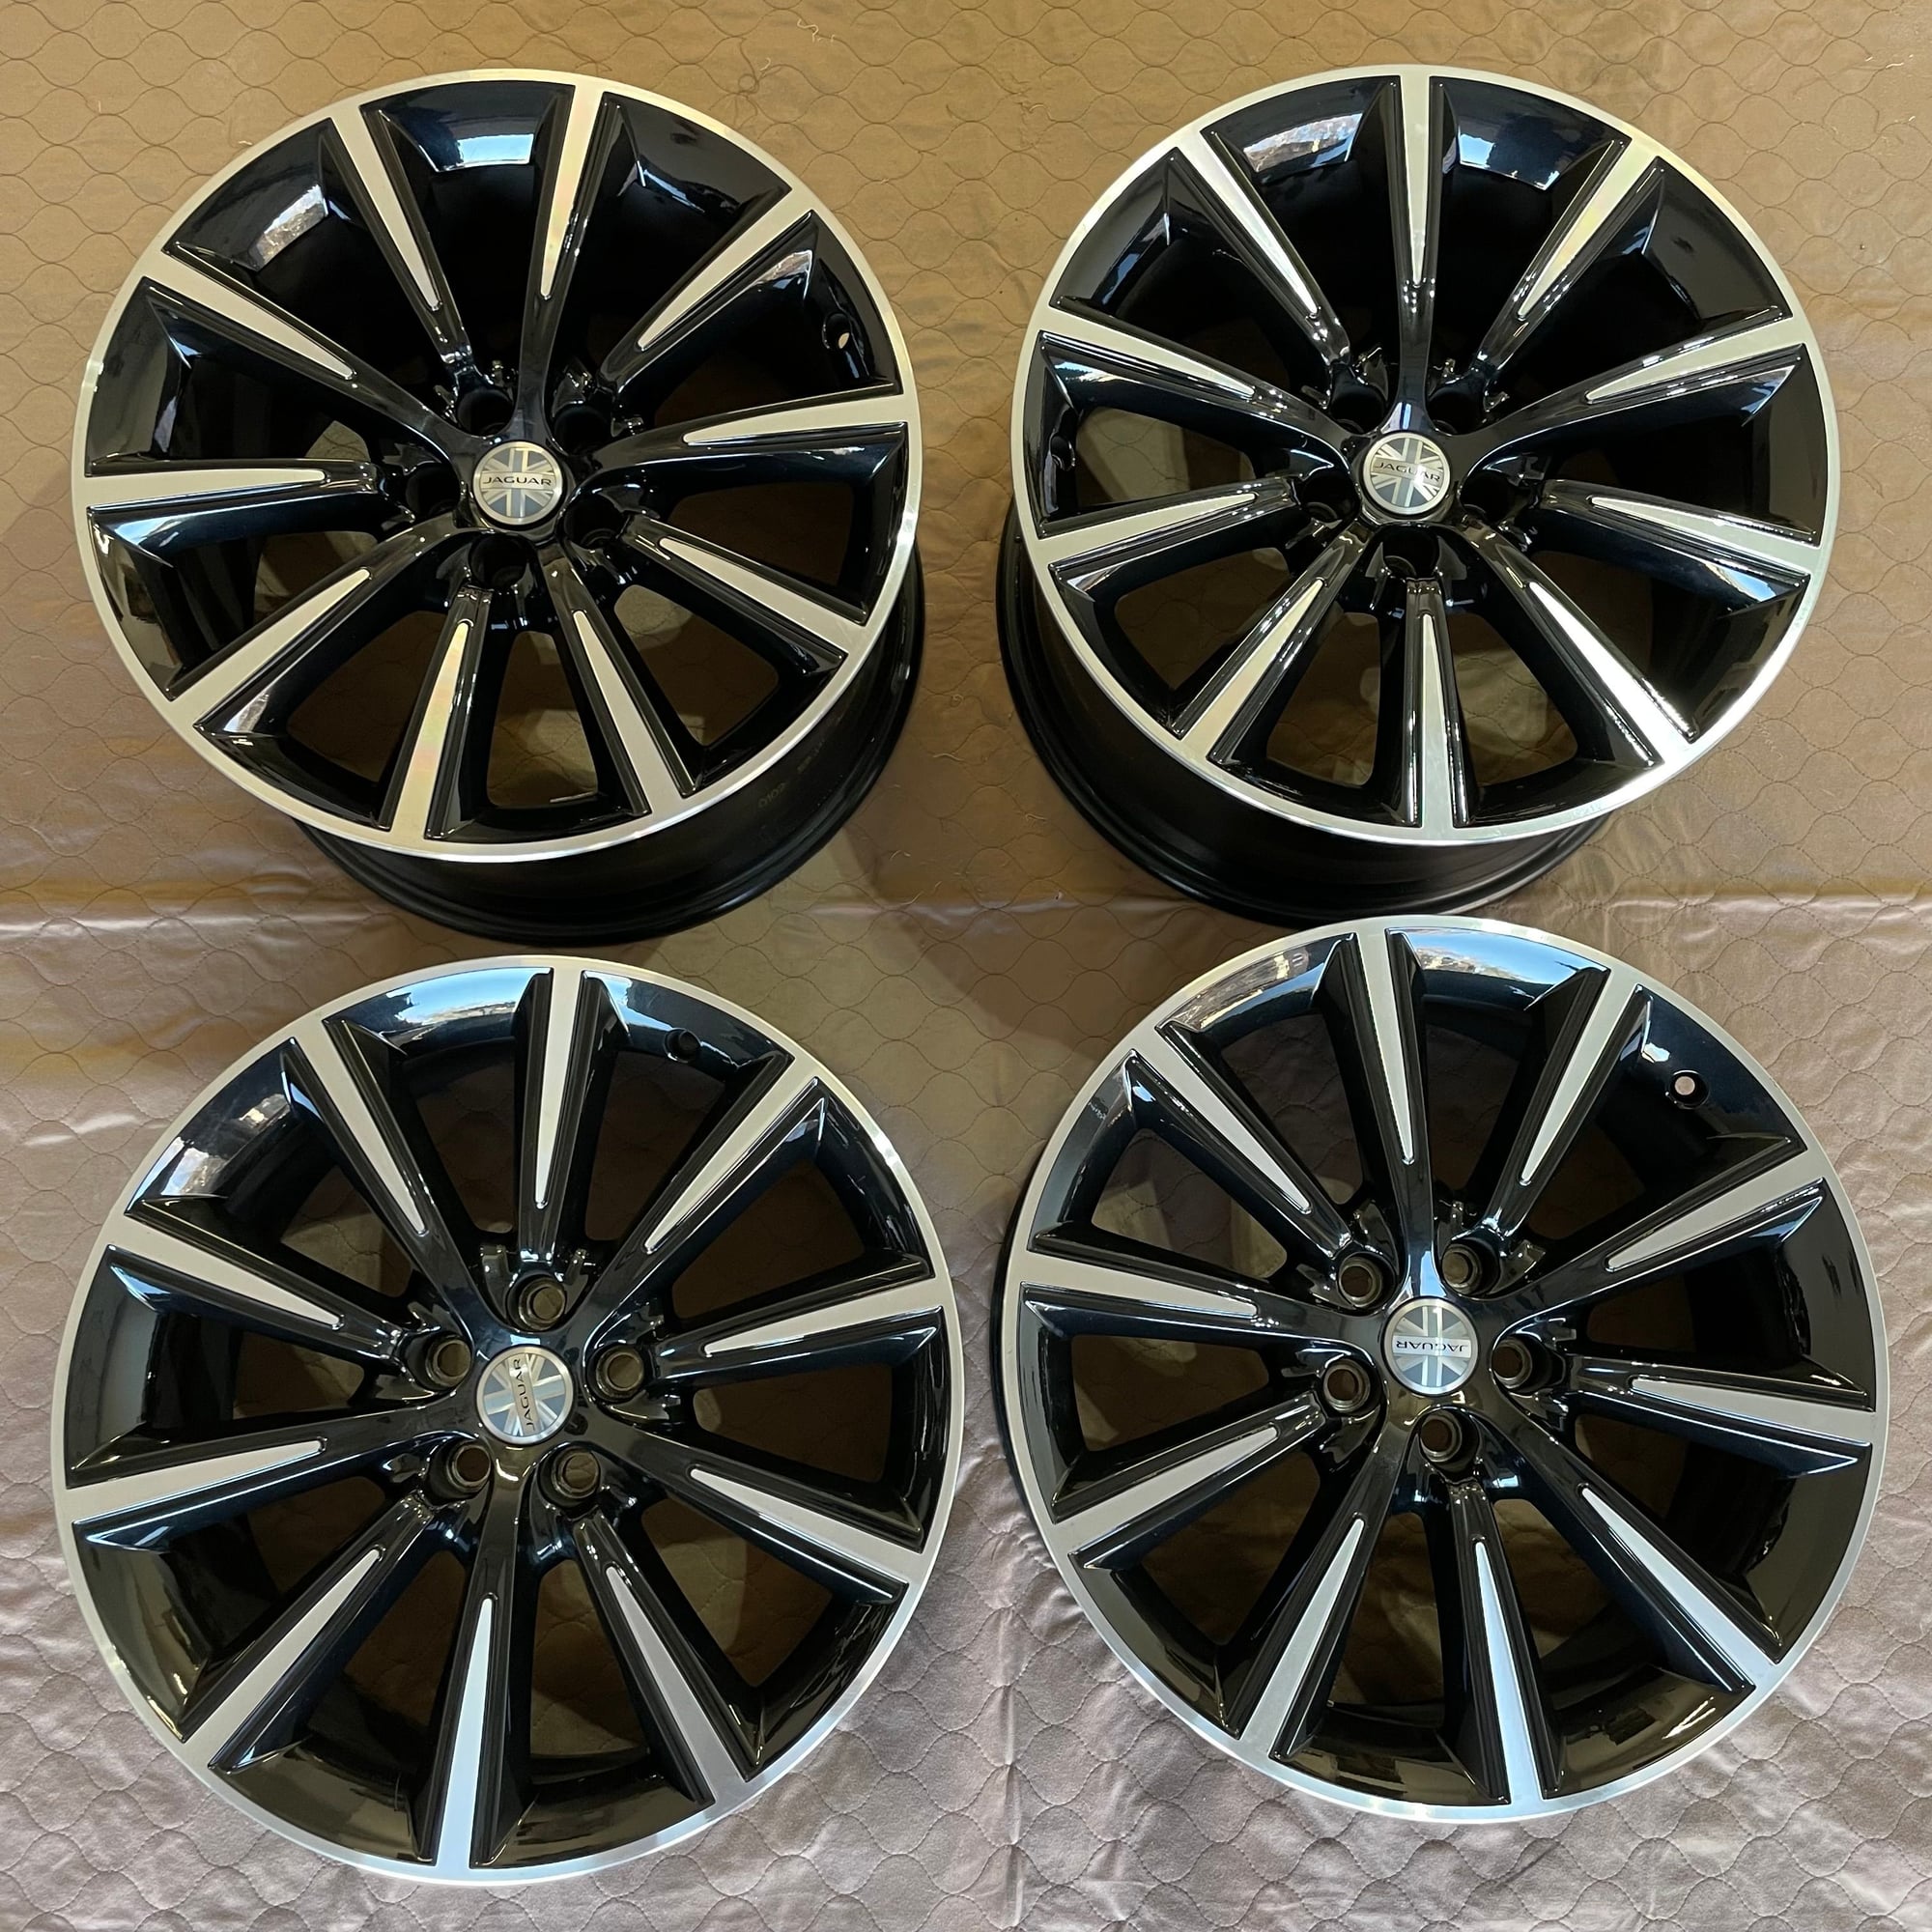 Wheels and Tires/Axles - 19" OEM Gloss Black Diamond Turned Finish Alloy Rims for F-Type - Used - 2014 to 2022 Jaguar F-Type - East Bay, CA 94579, United States